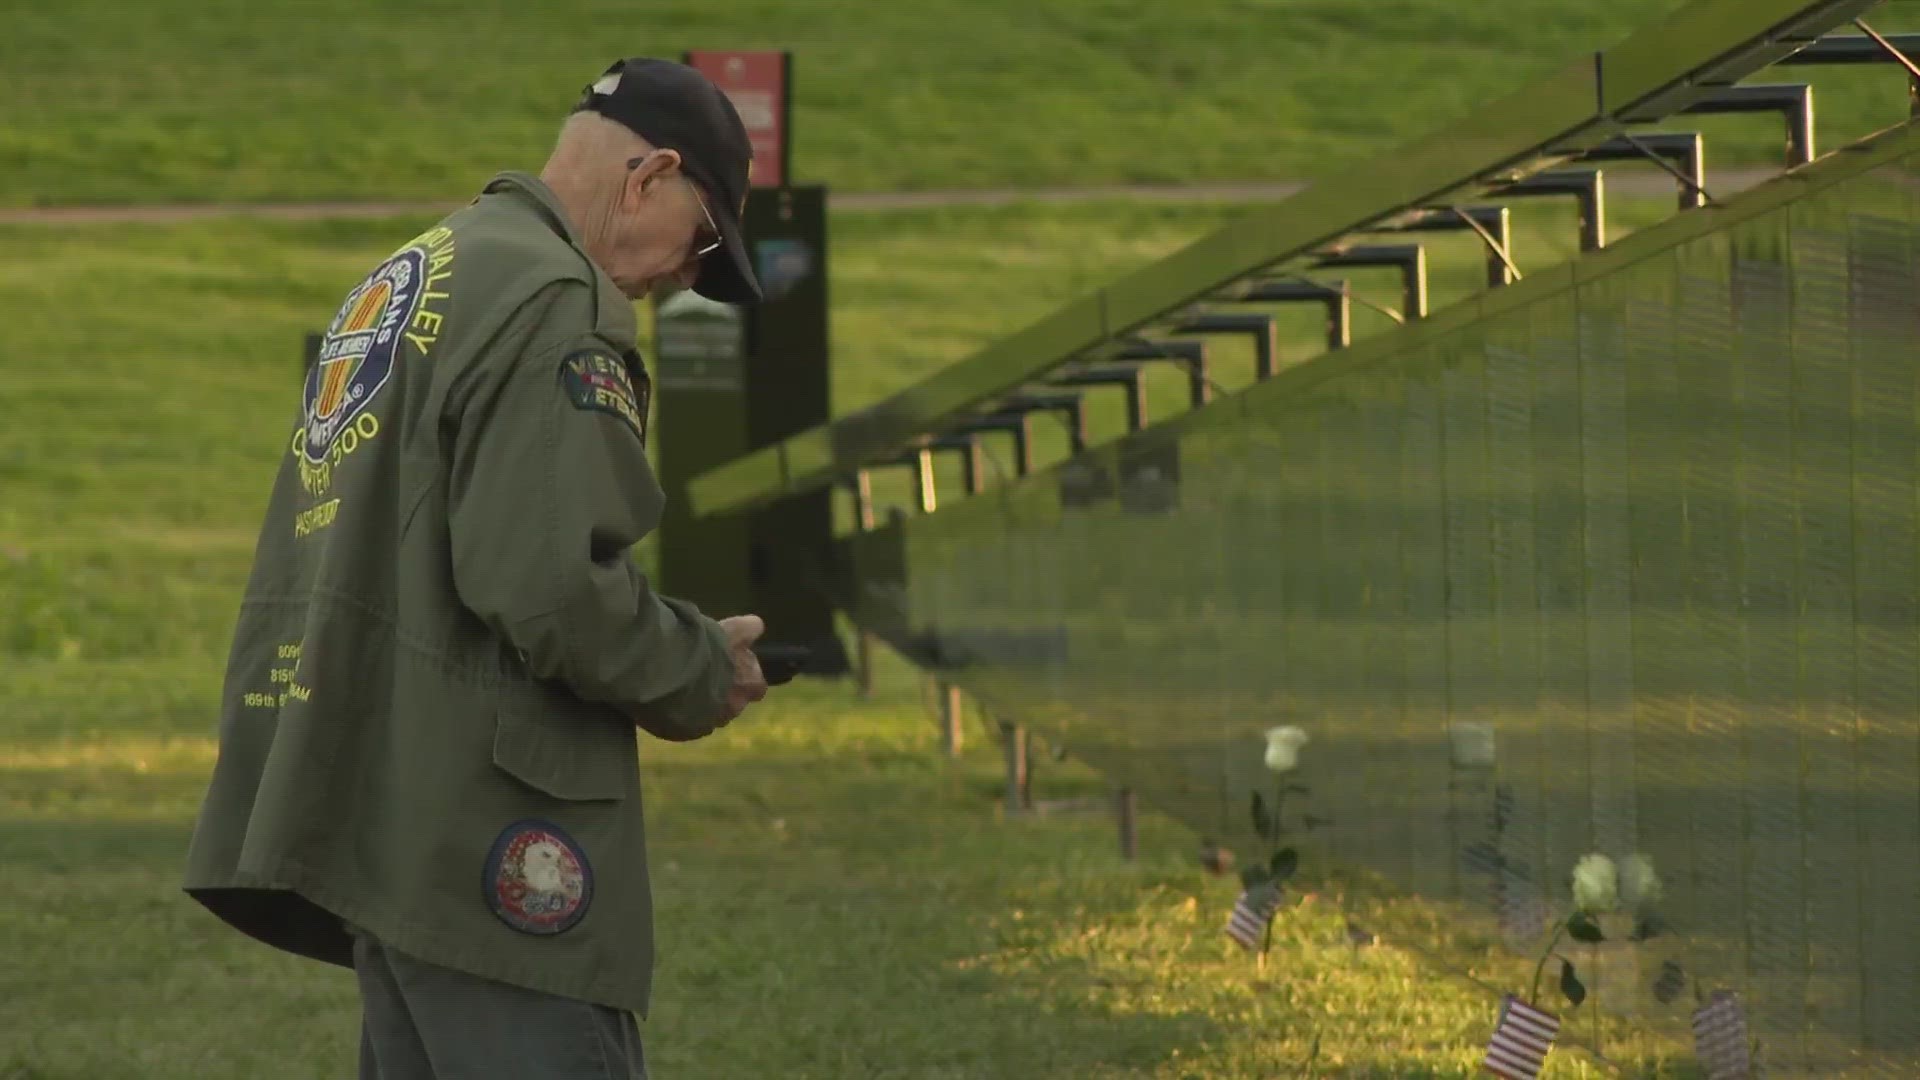 Travis Air Force Base celebrated the 50th anniversary Friday and Citrus Heights is honoring all veterans with The Wall That Heals memorial through the weekend.